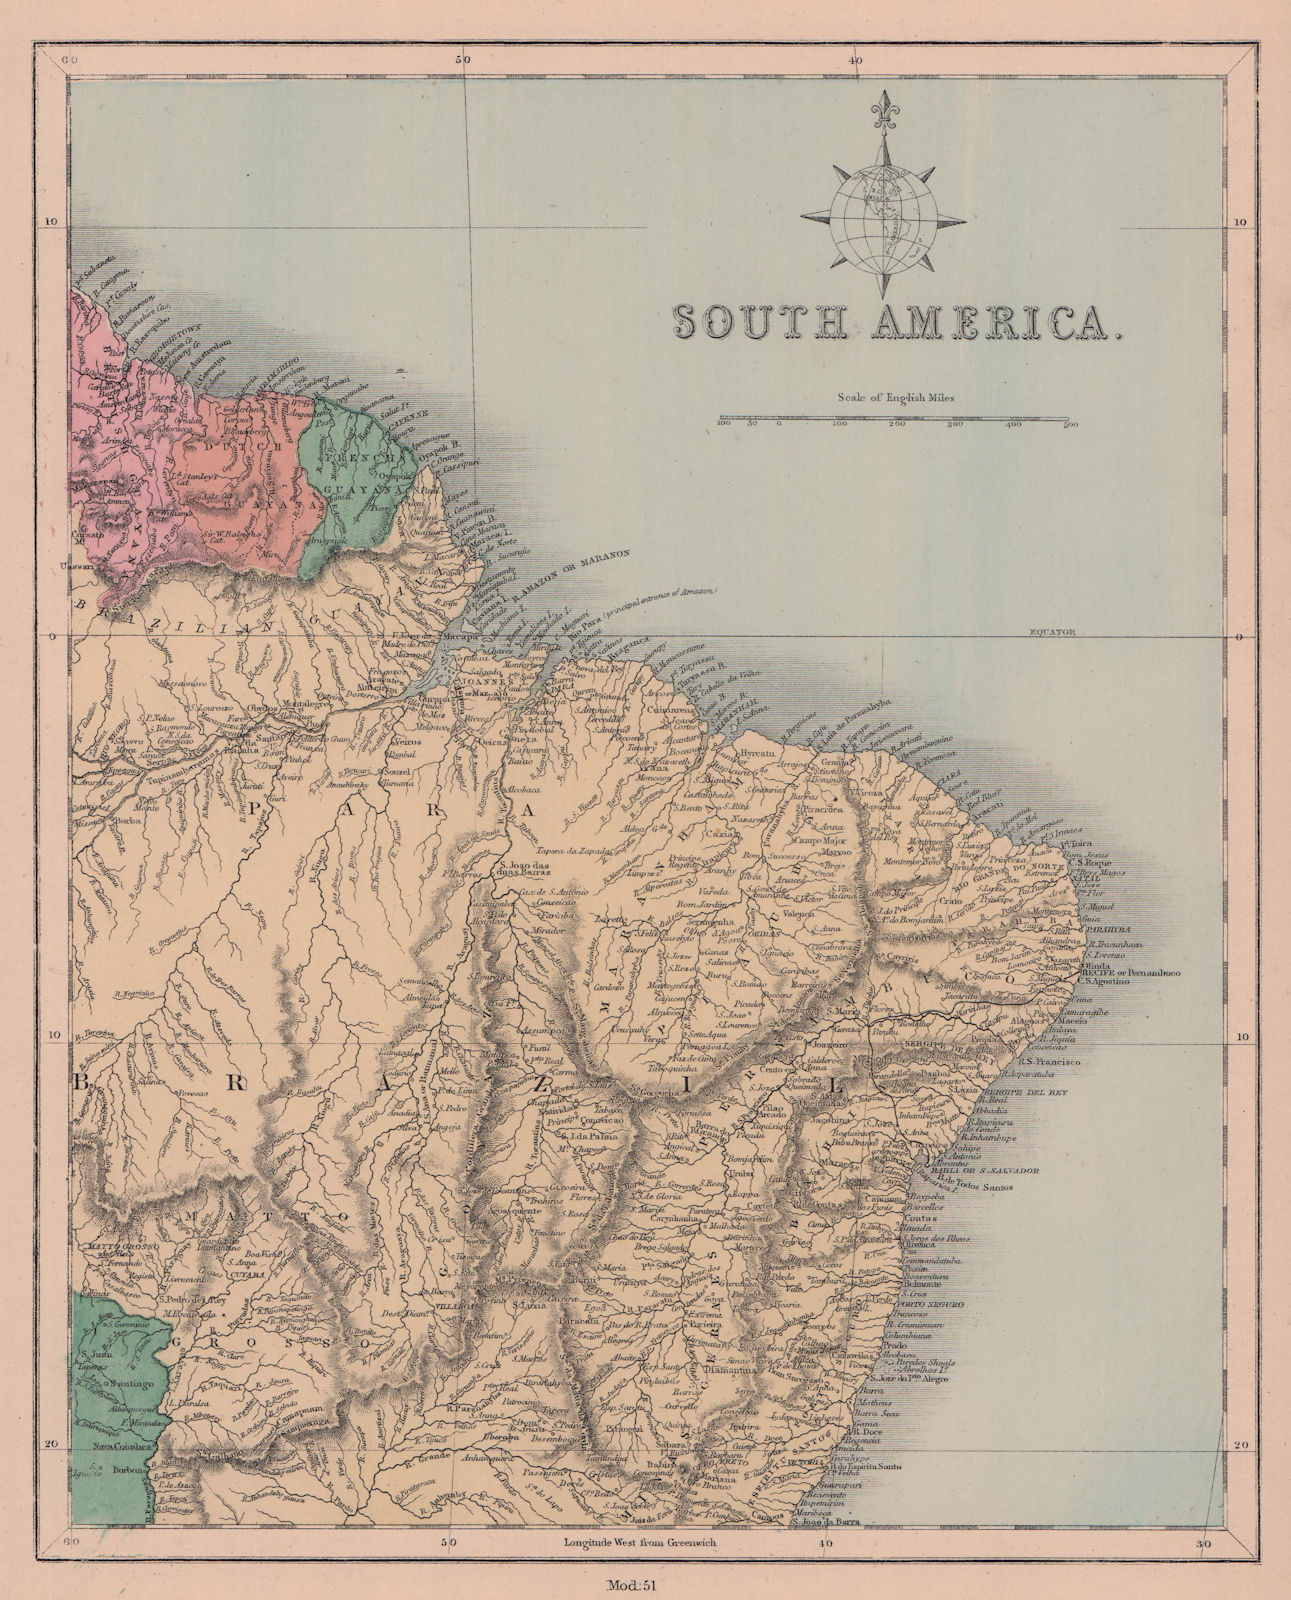 Associate Product South America north east. Brazil & Guianas. HUGHES 1876 old antique map chart